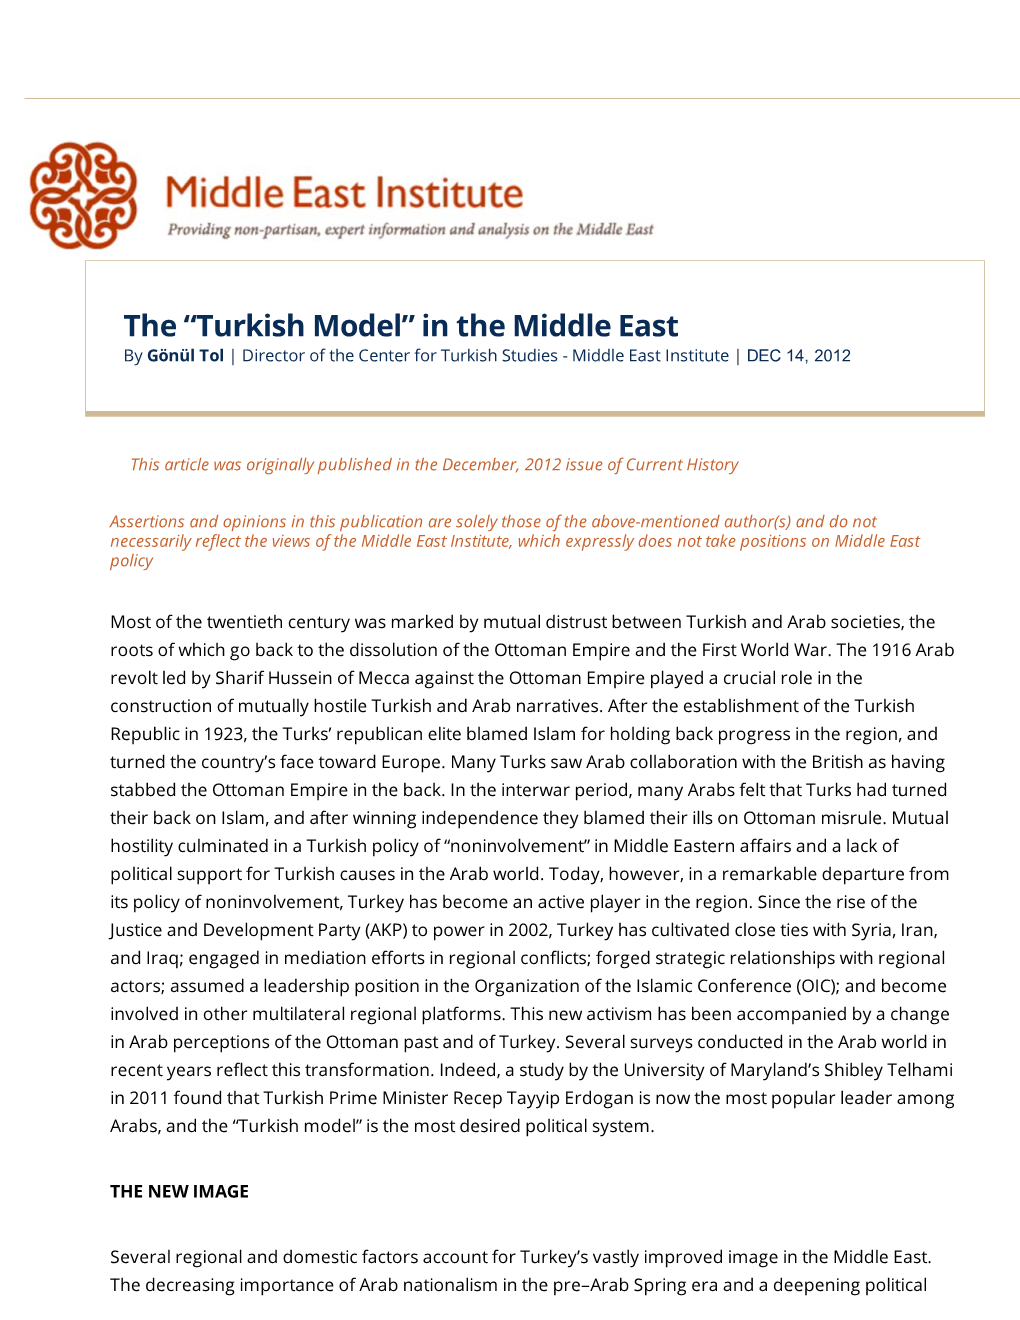 The “Turkish Model” in the Middle East | Middle East Institute